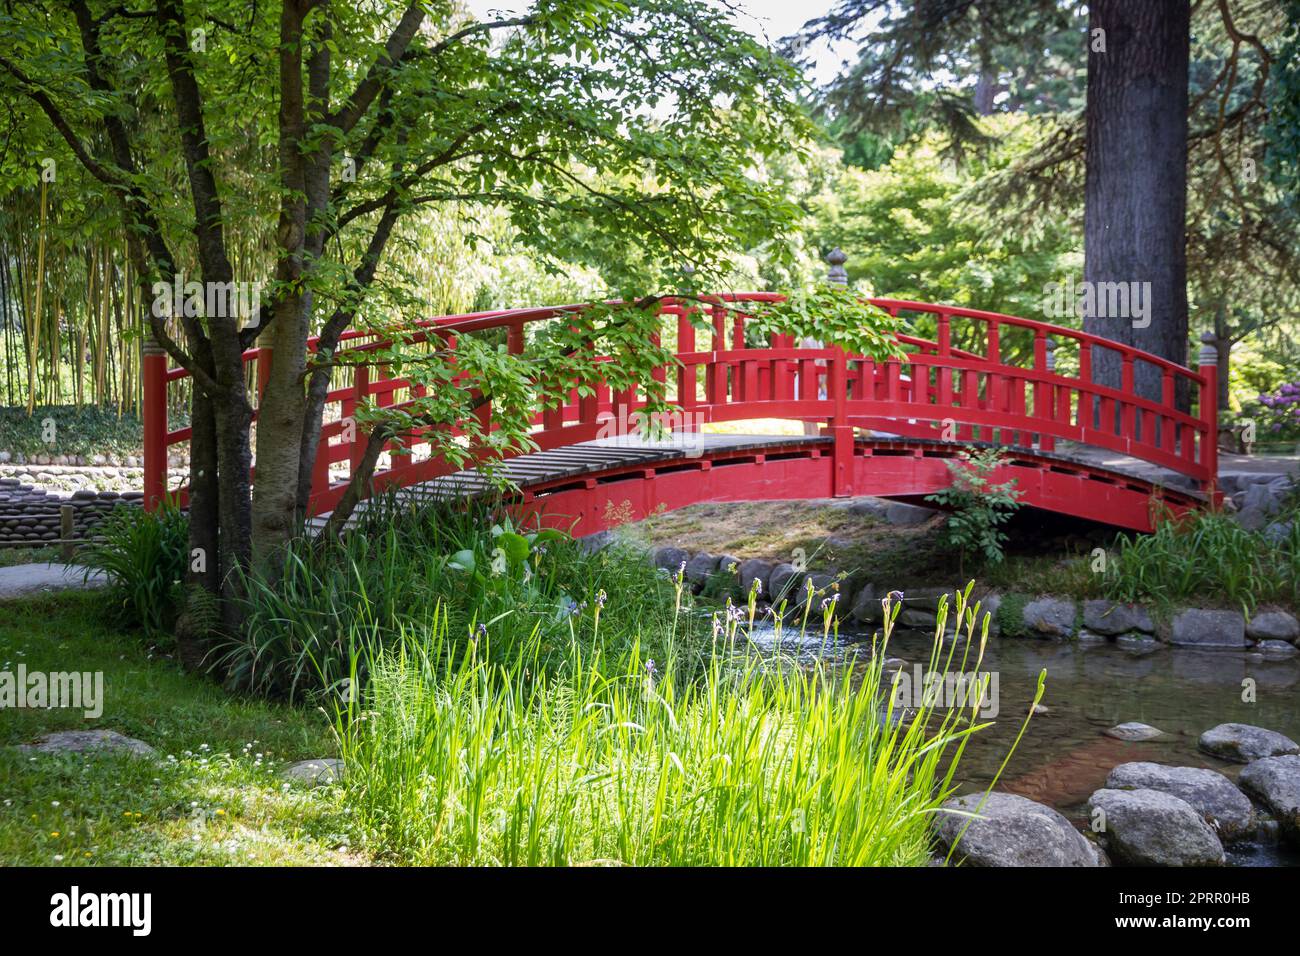 Traditional red wooden bridge on a japanese garden pond Stock Photo